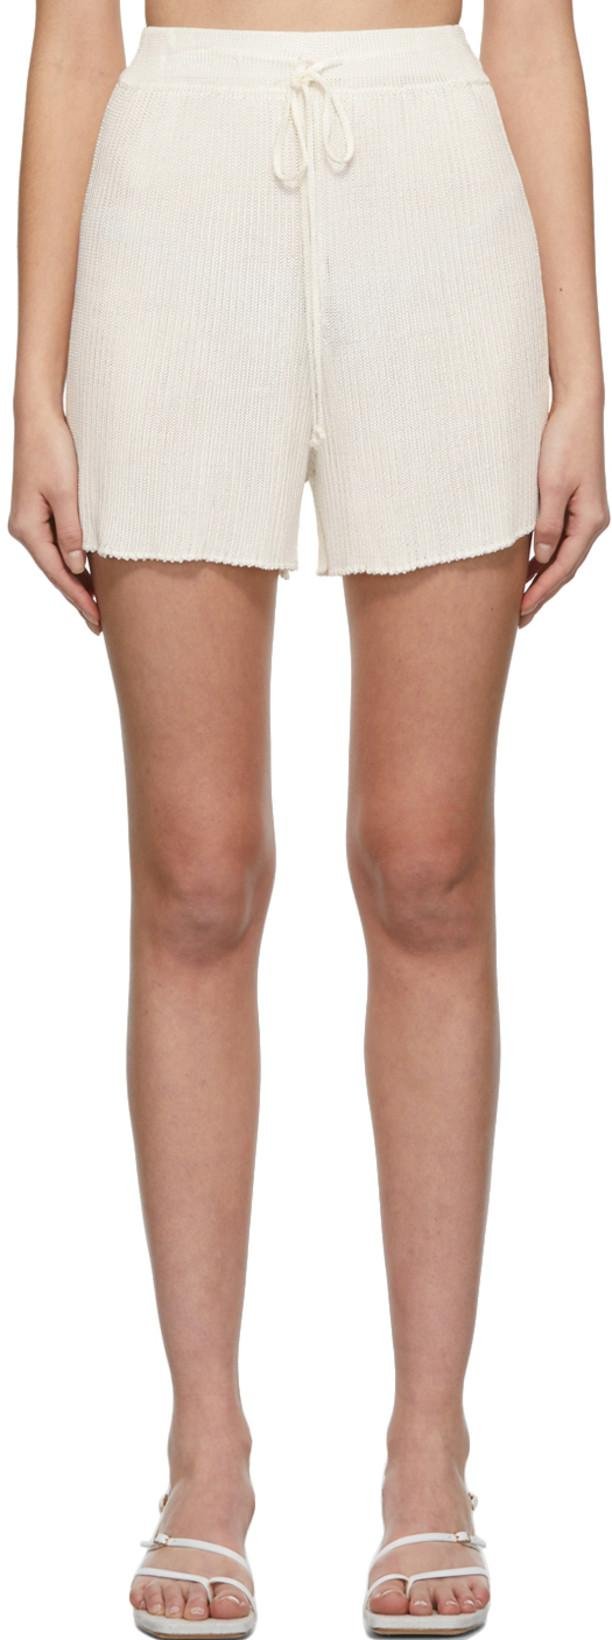 Off-White Ribbed Shorts by CALLE DEL MAR